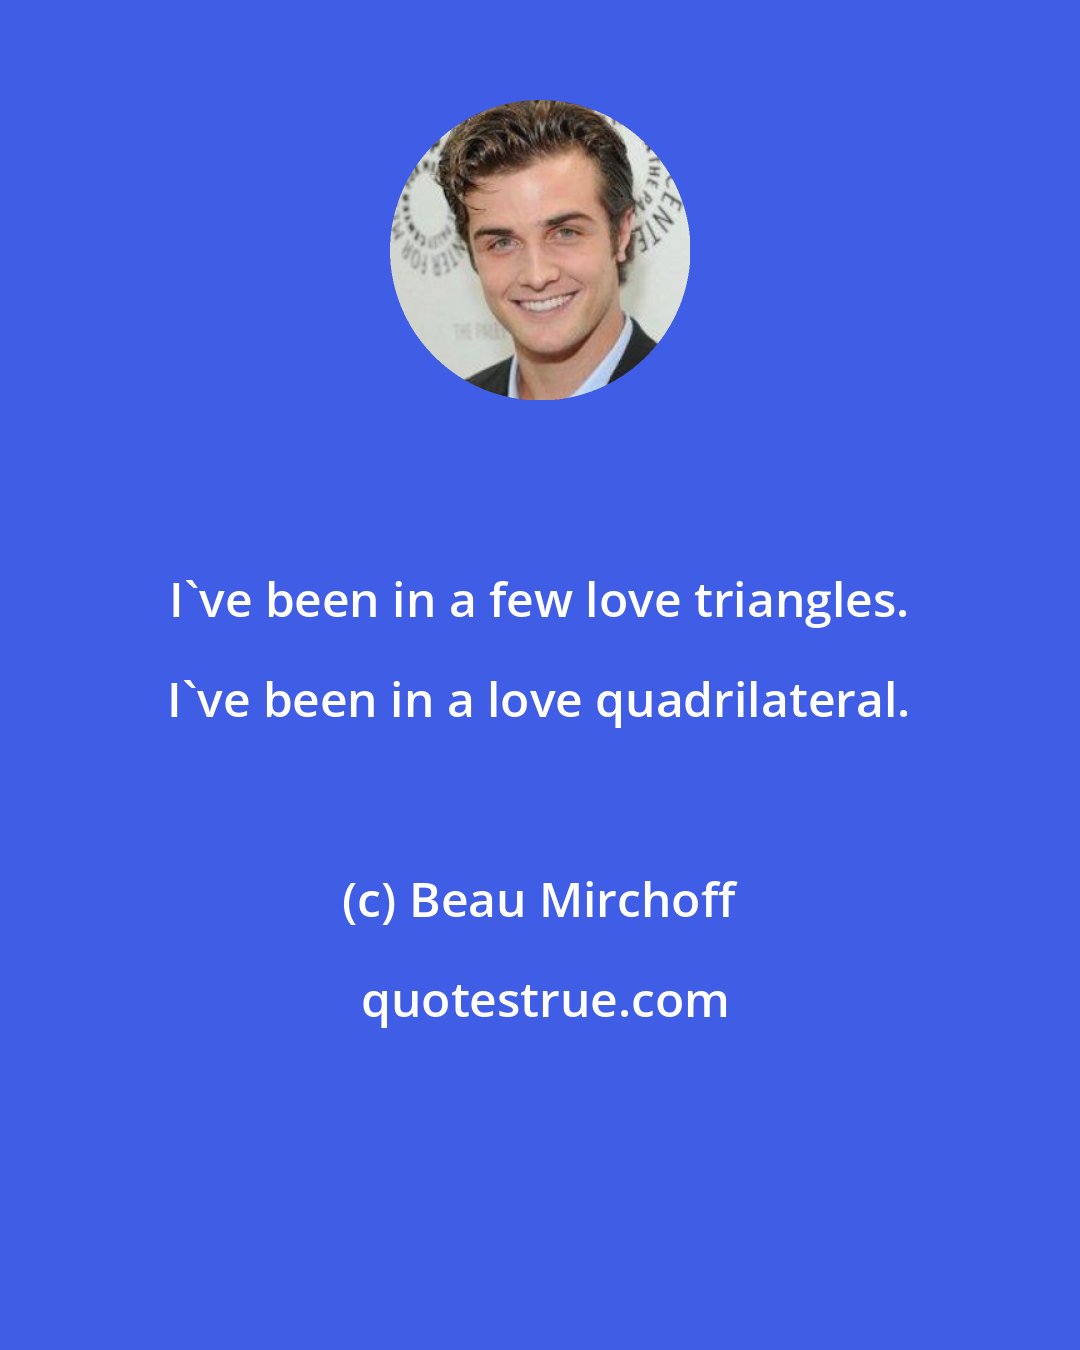 Beau Mirchoff: I've been in a few love triangles. I've been in a love quadrilateral.